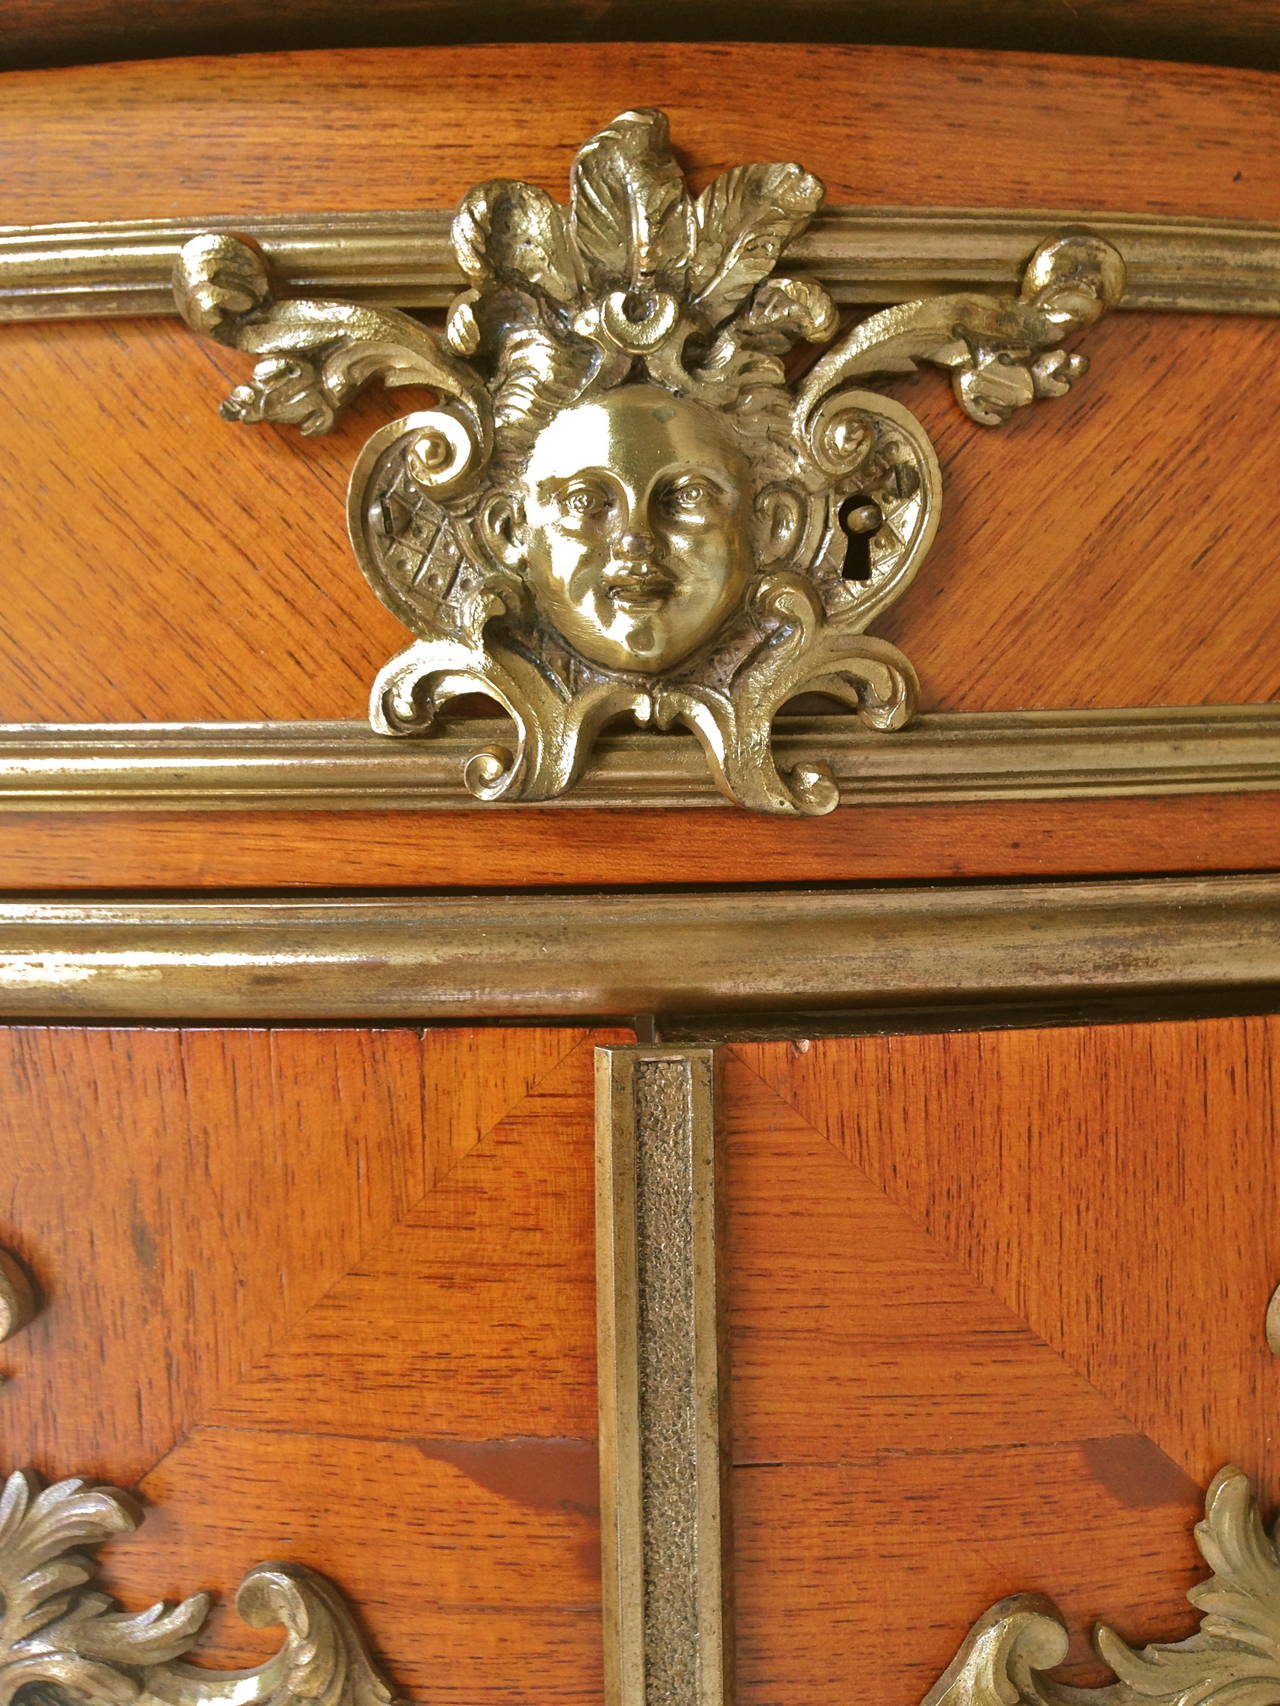 A beautiful and useful piece, very strong casting and chiseling on the bronze mounts. The cabinet of kingwood is in original finish that is well preserved.
A great size and with a mirrored back and two shelves for display.